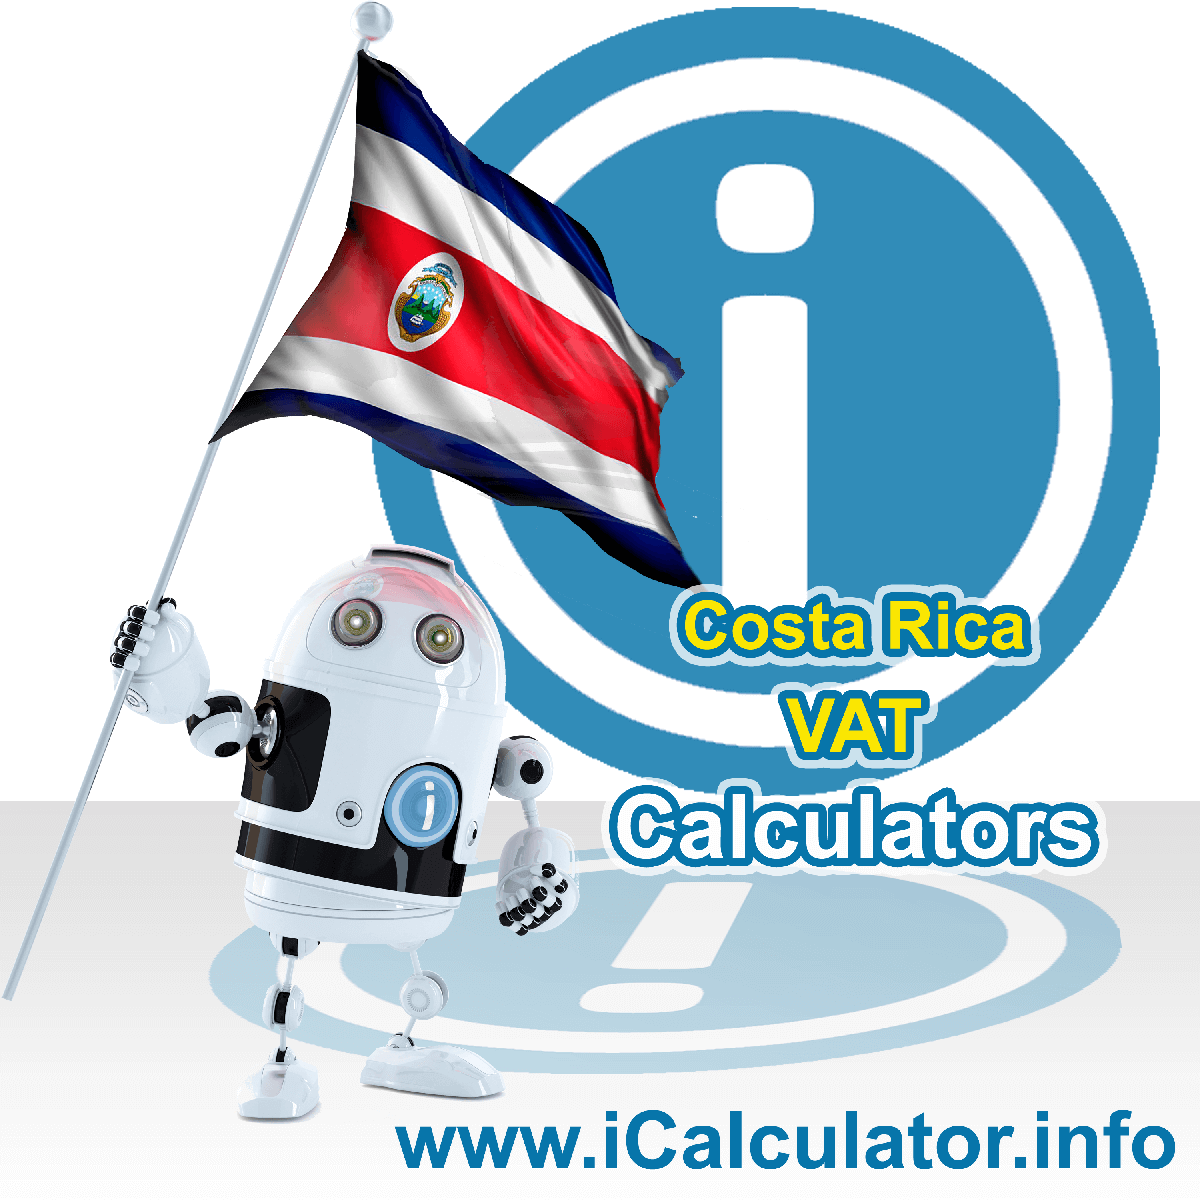 Costa Rica VAT Calculator. This image shows the Costa Rica flag and information relating to the VAT formula used for calculating Value Added Tax in Costa Rica using the Costa Rica VAT Calculator in 2023